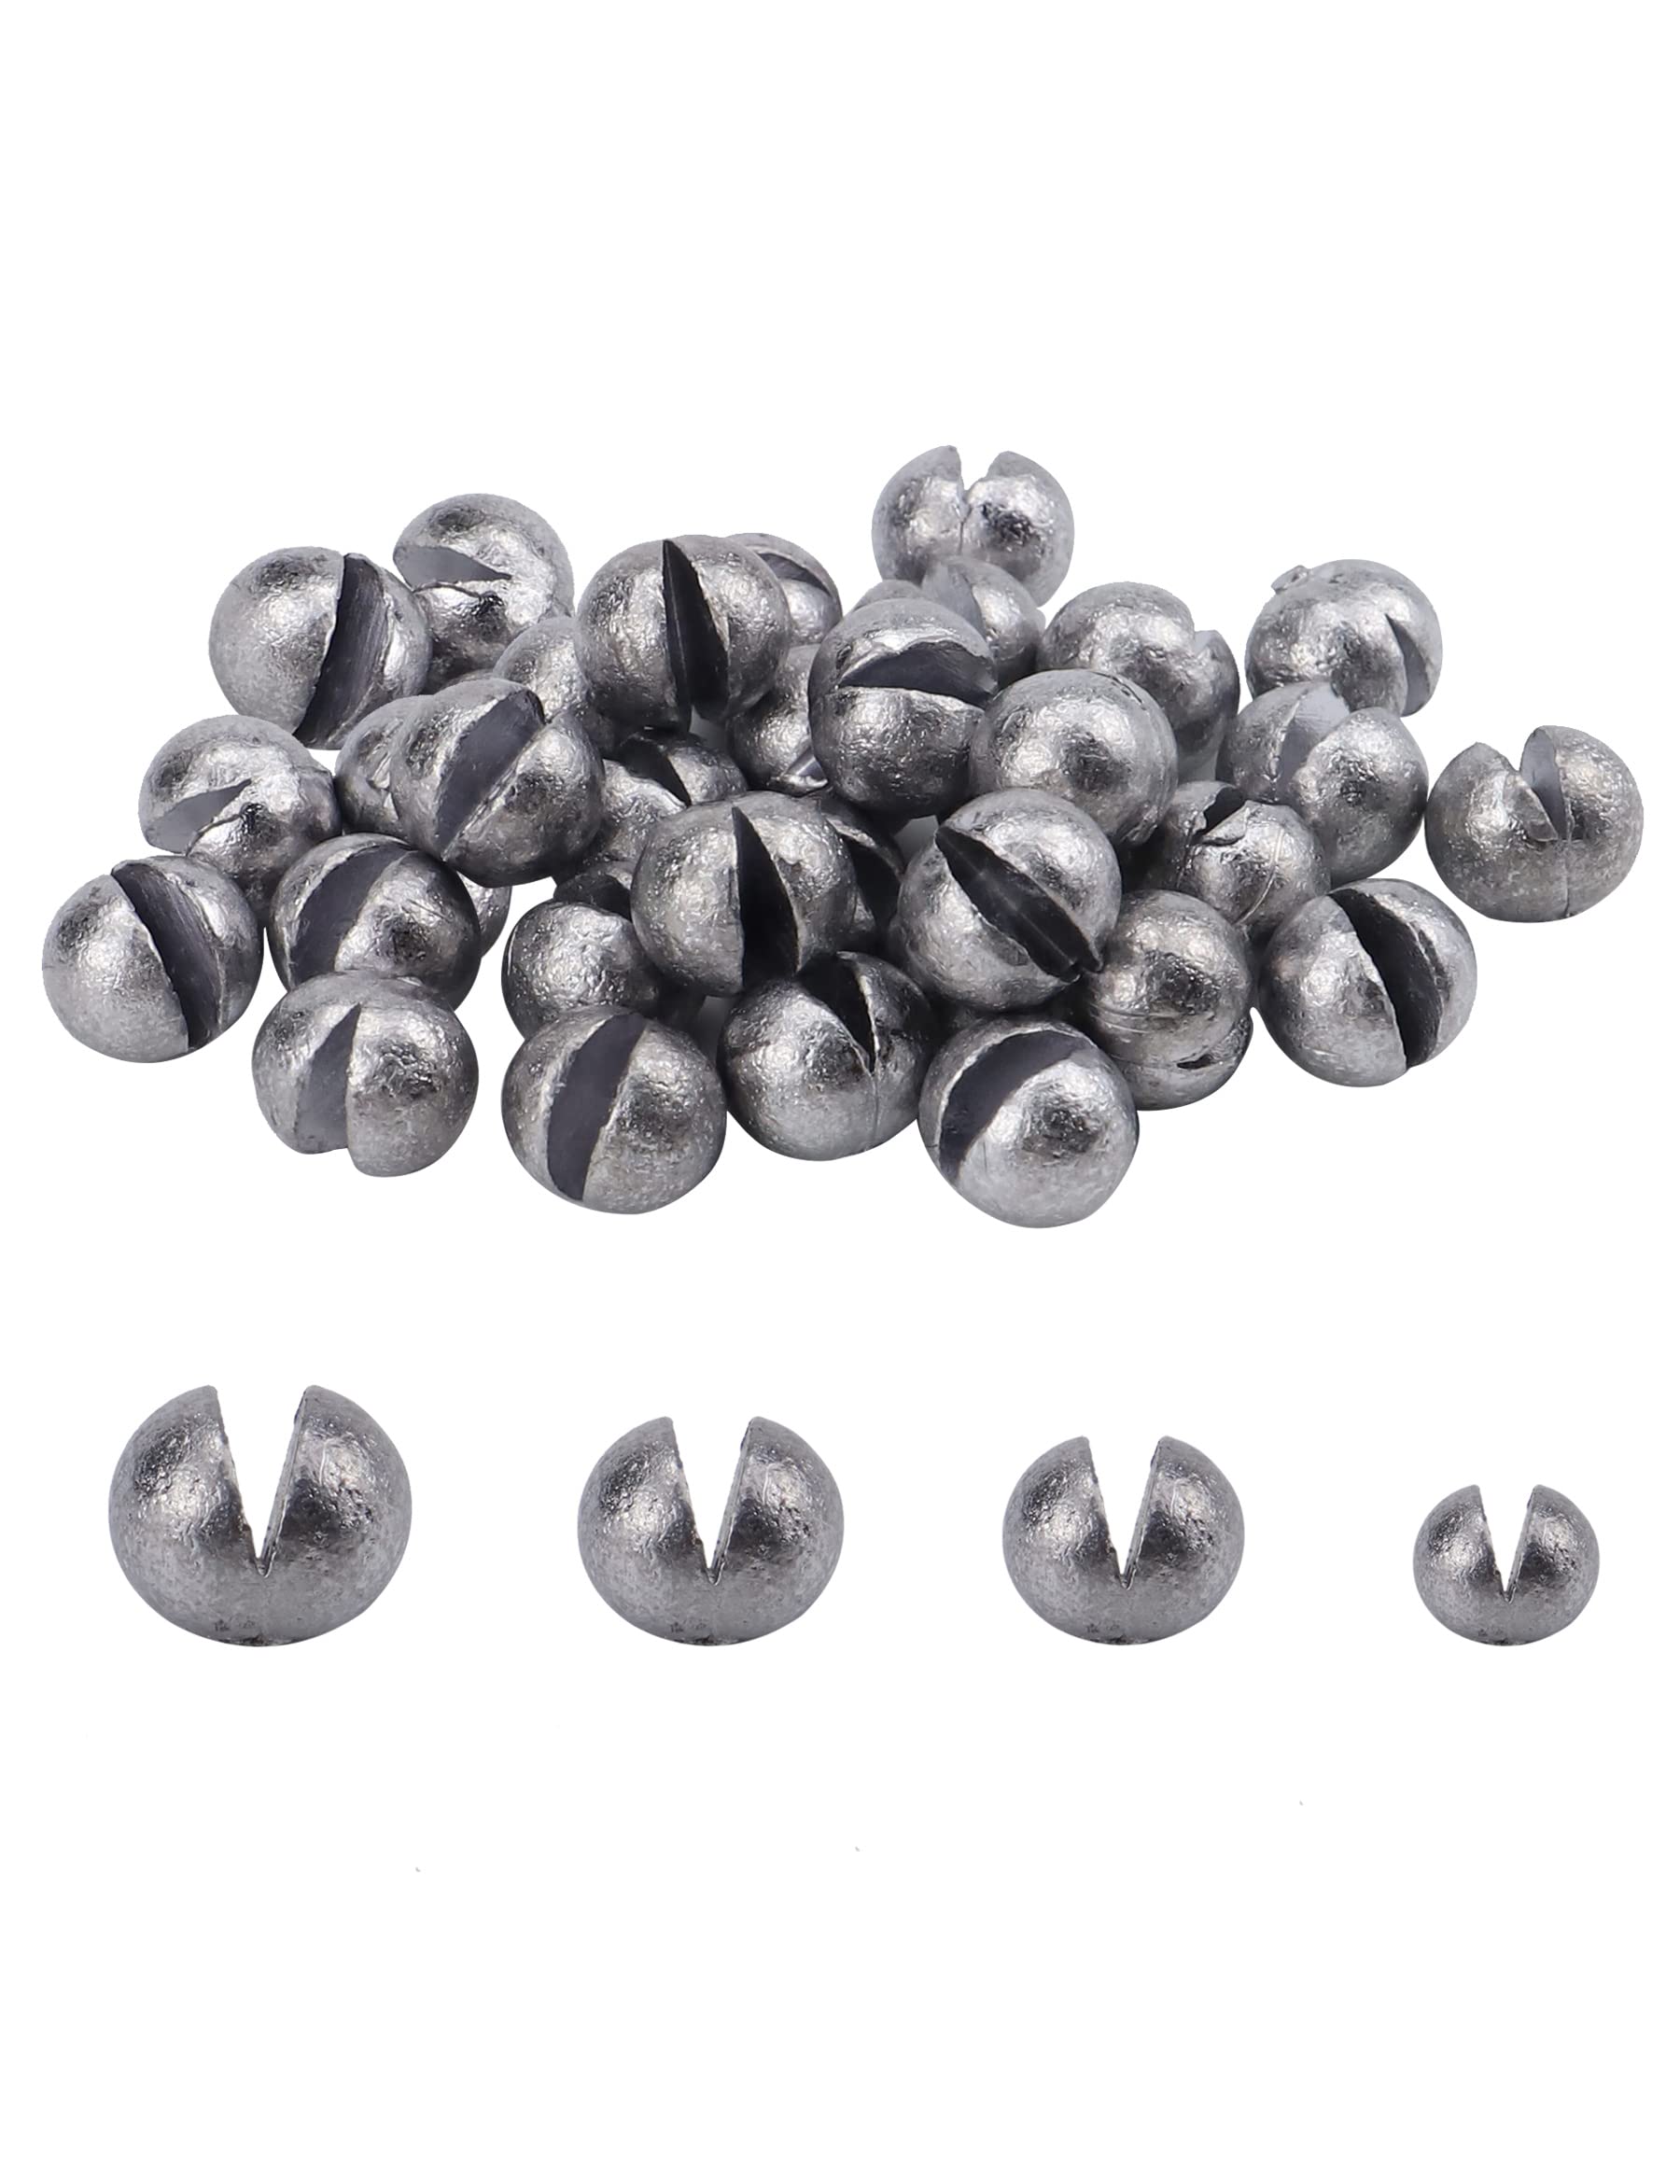 Avlcoaky Split Shot Fishing Weights 50 Pack Large Sinkers for Fishing Line  Removable Round Split Shot